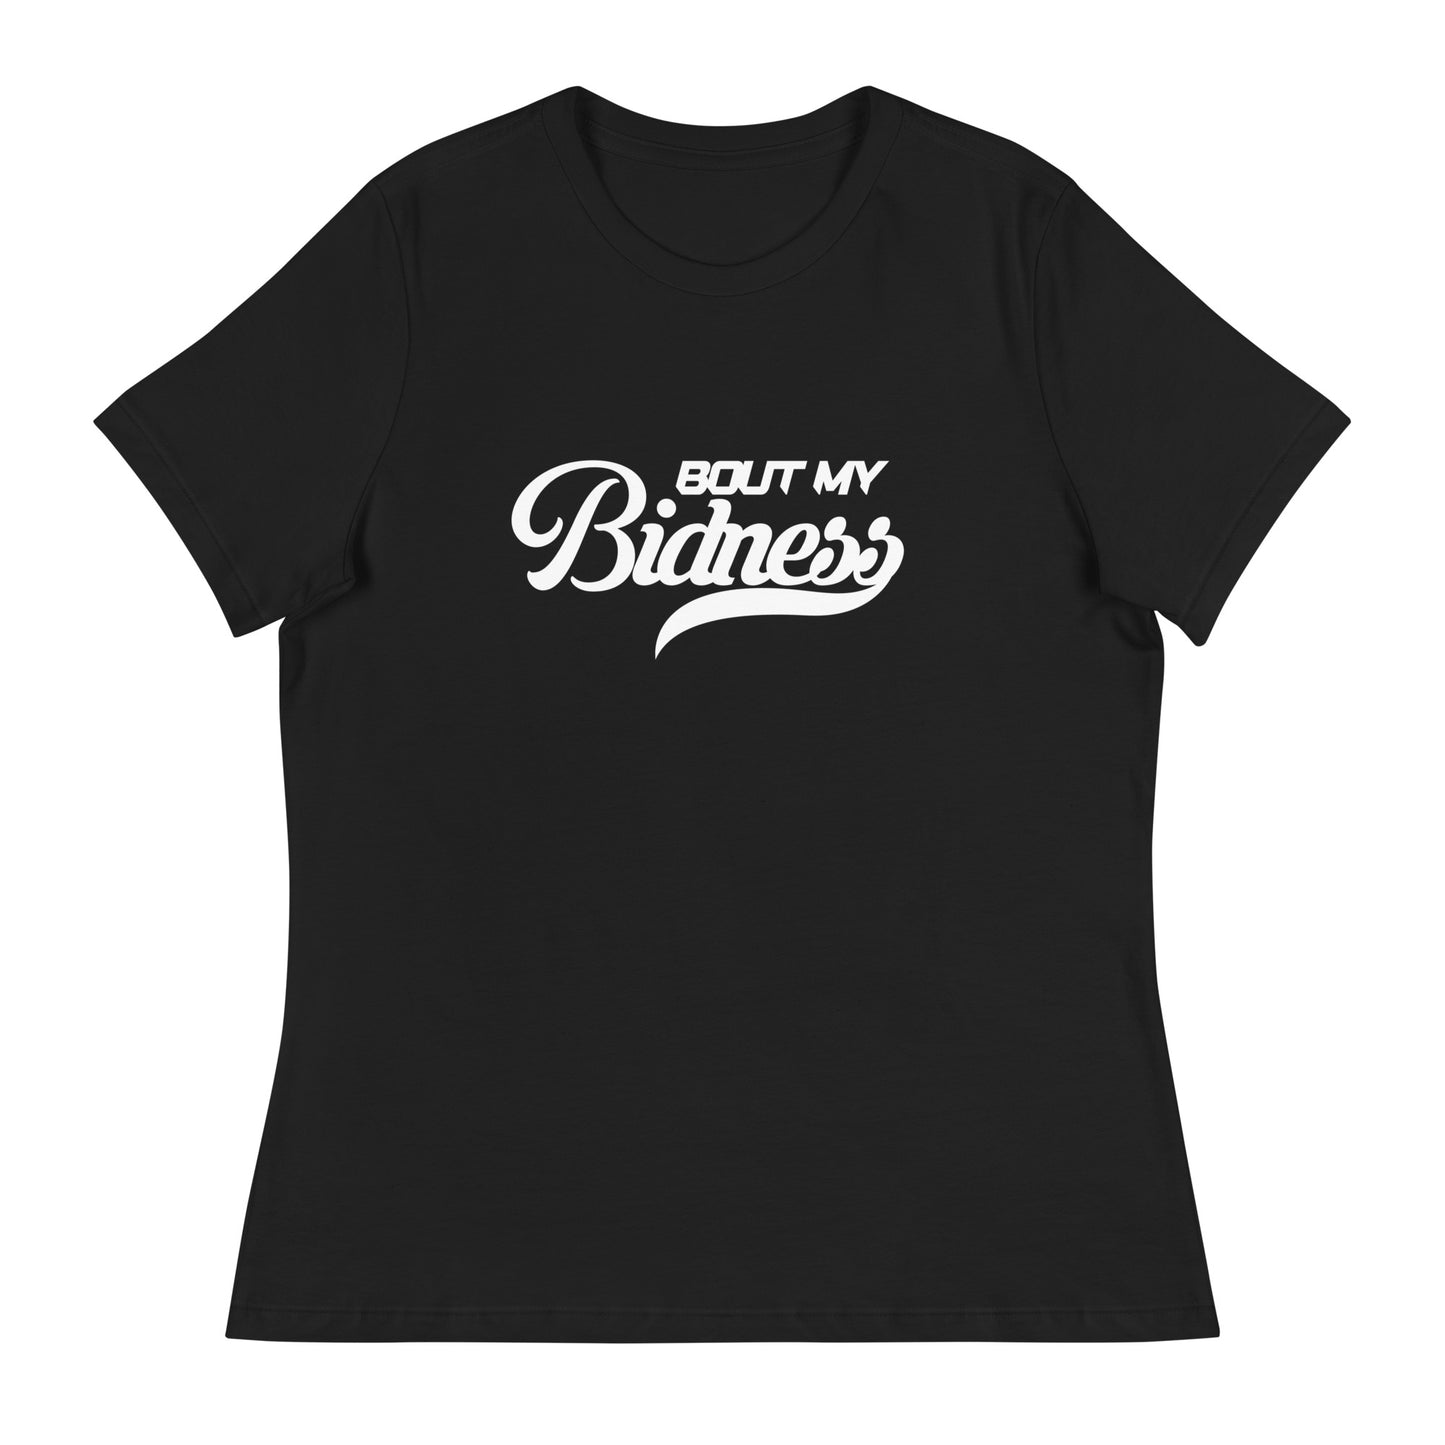 Bout My Bidness Women's Relaxed T-Shirt